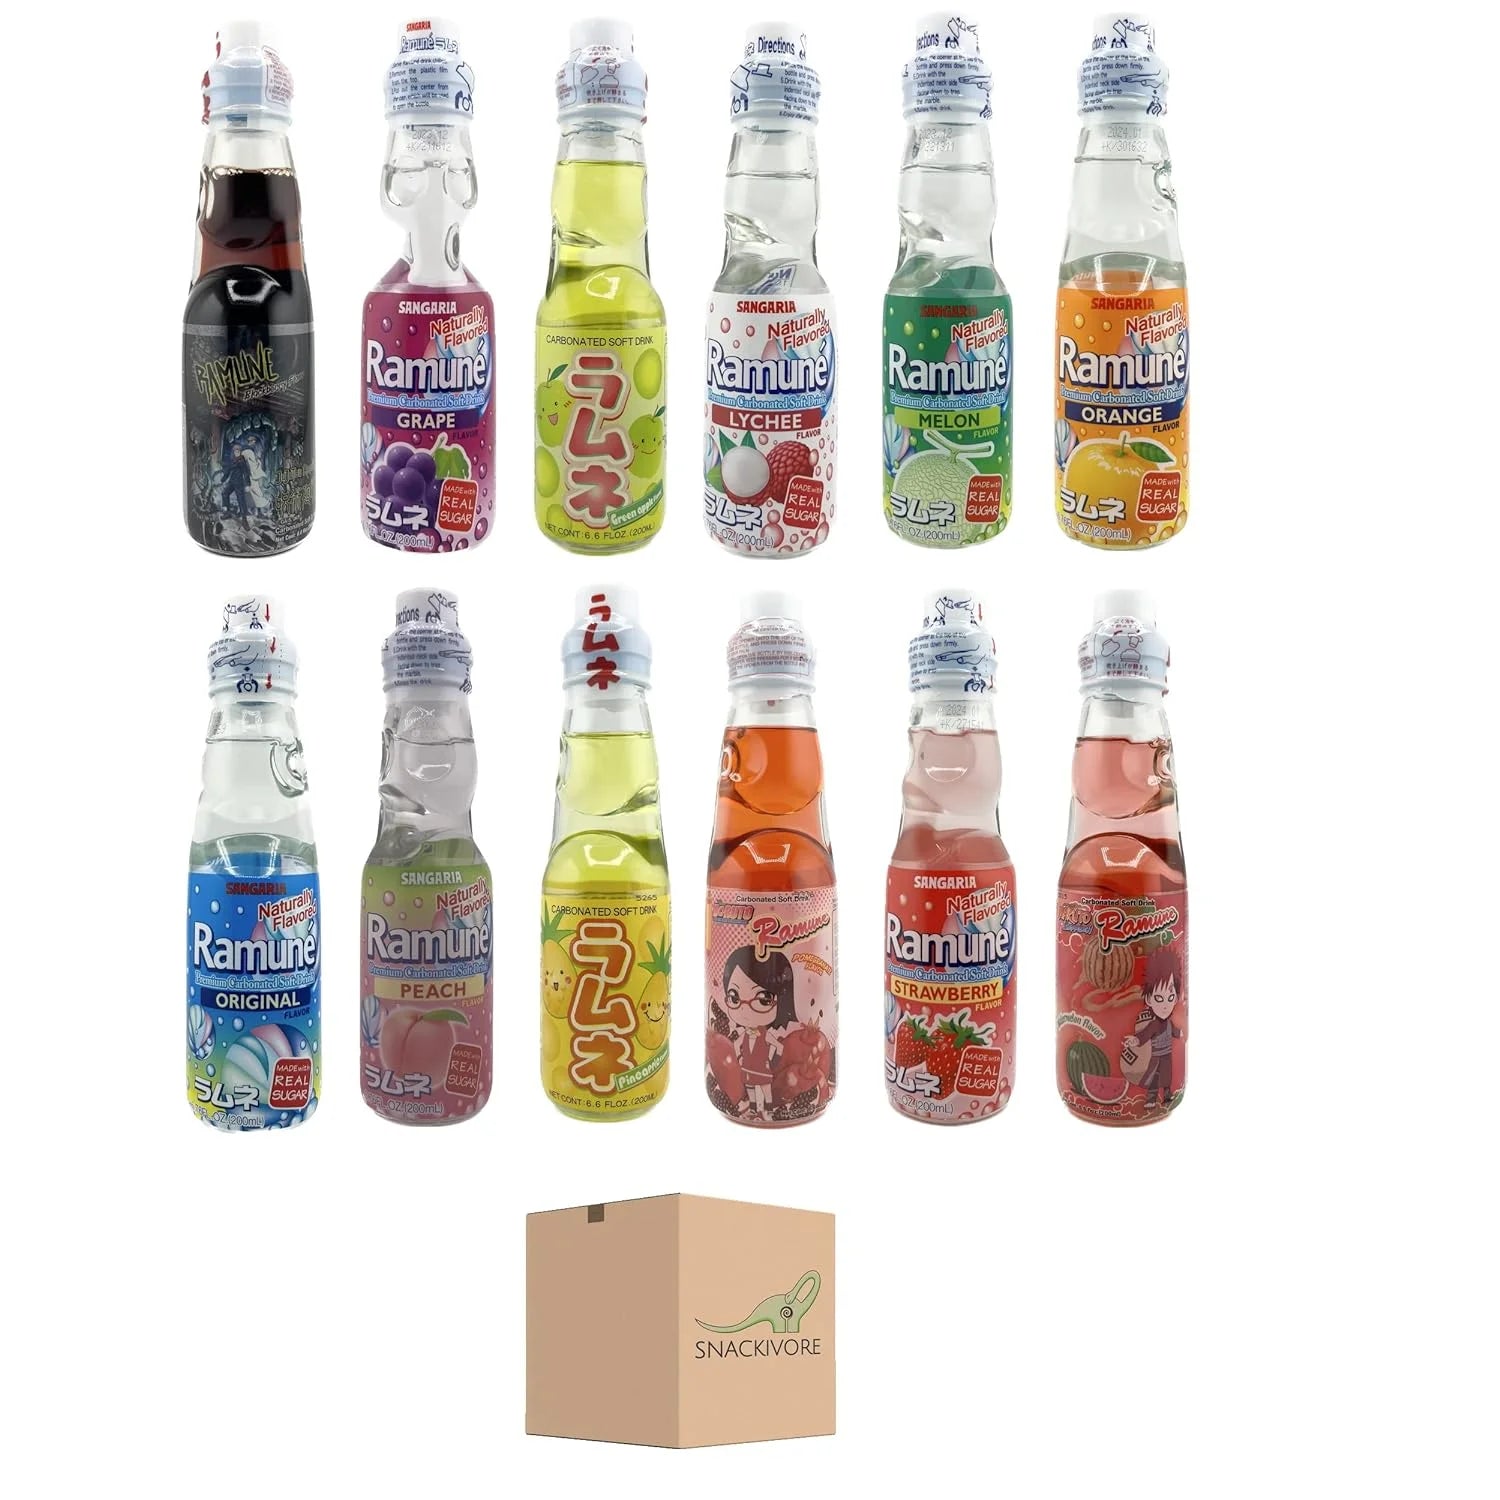 Sangaria Ramune Marble Soft Drink, 6.76 Fl Oz, Pack of 6